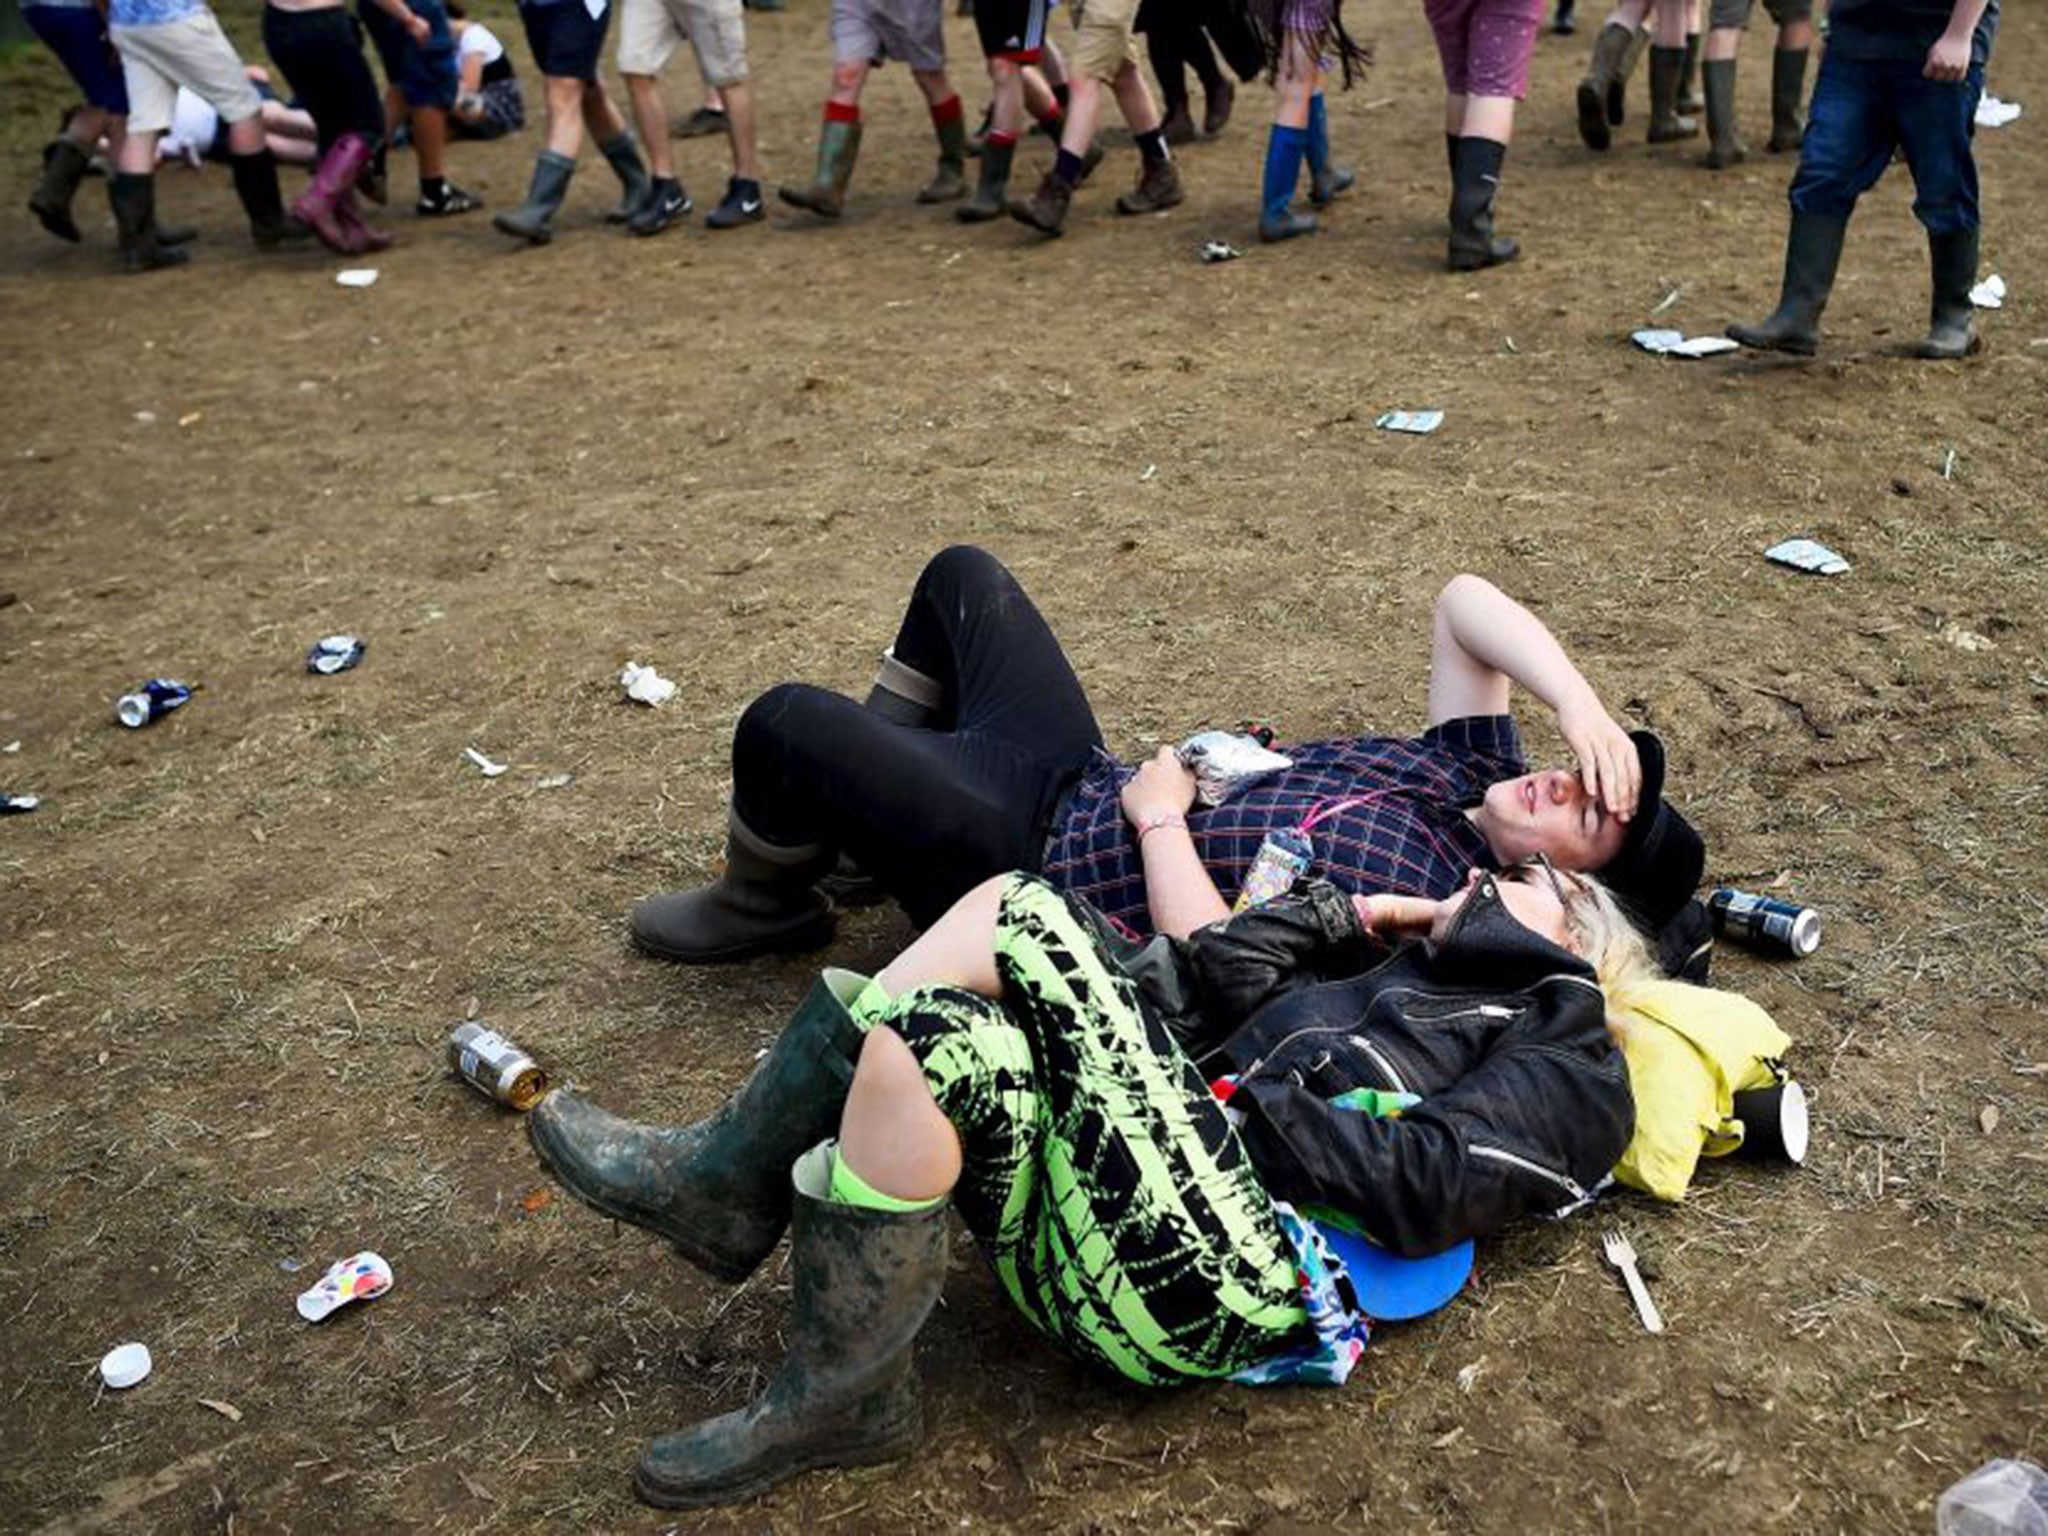 Revellers relax in front of the Other stage at Worthy Farm in Somerset during the Glastonbury Festival in Britain, June 27, 2015